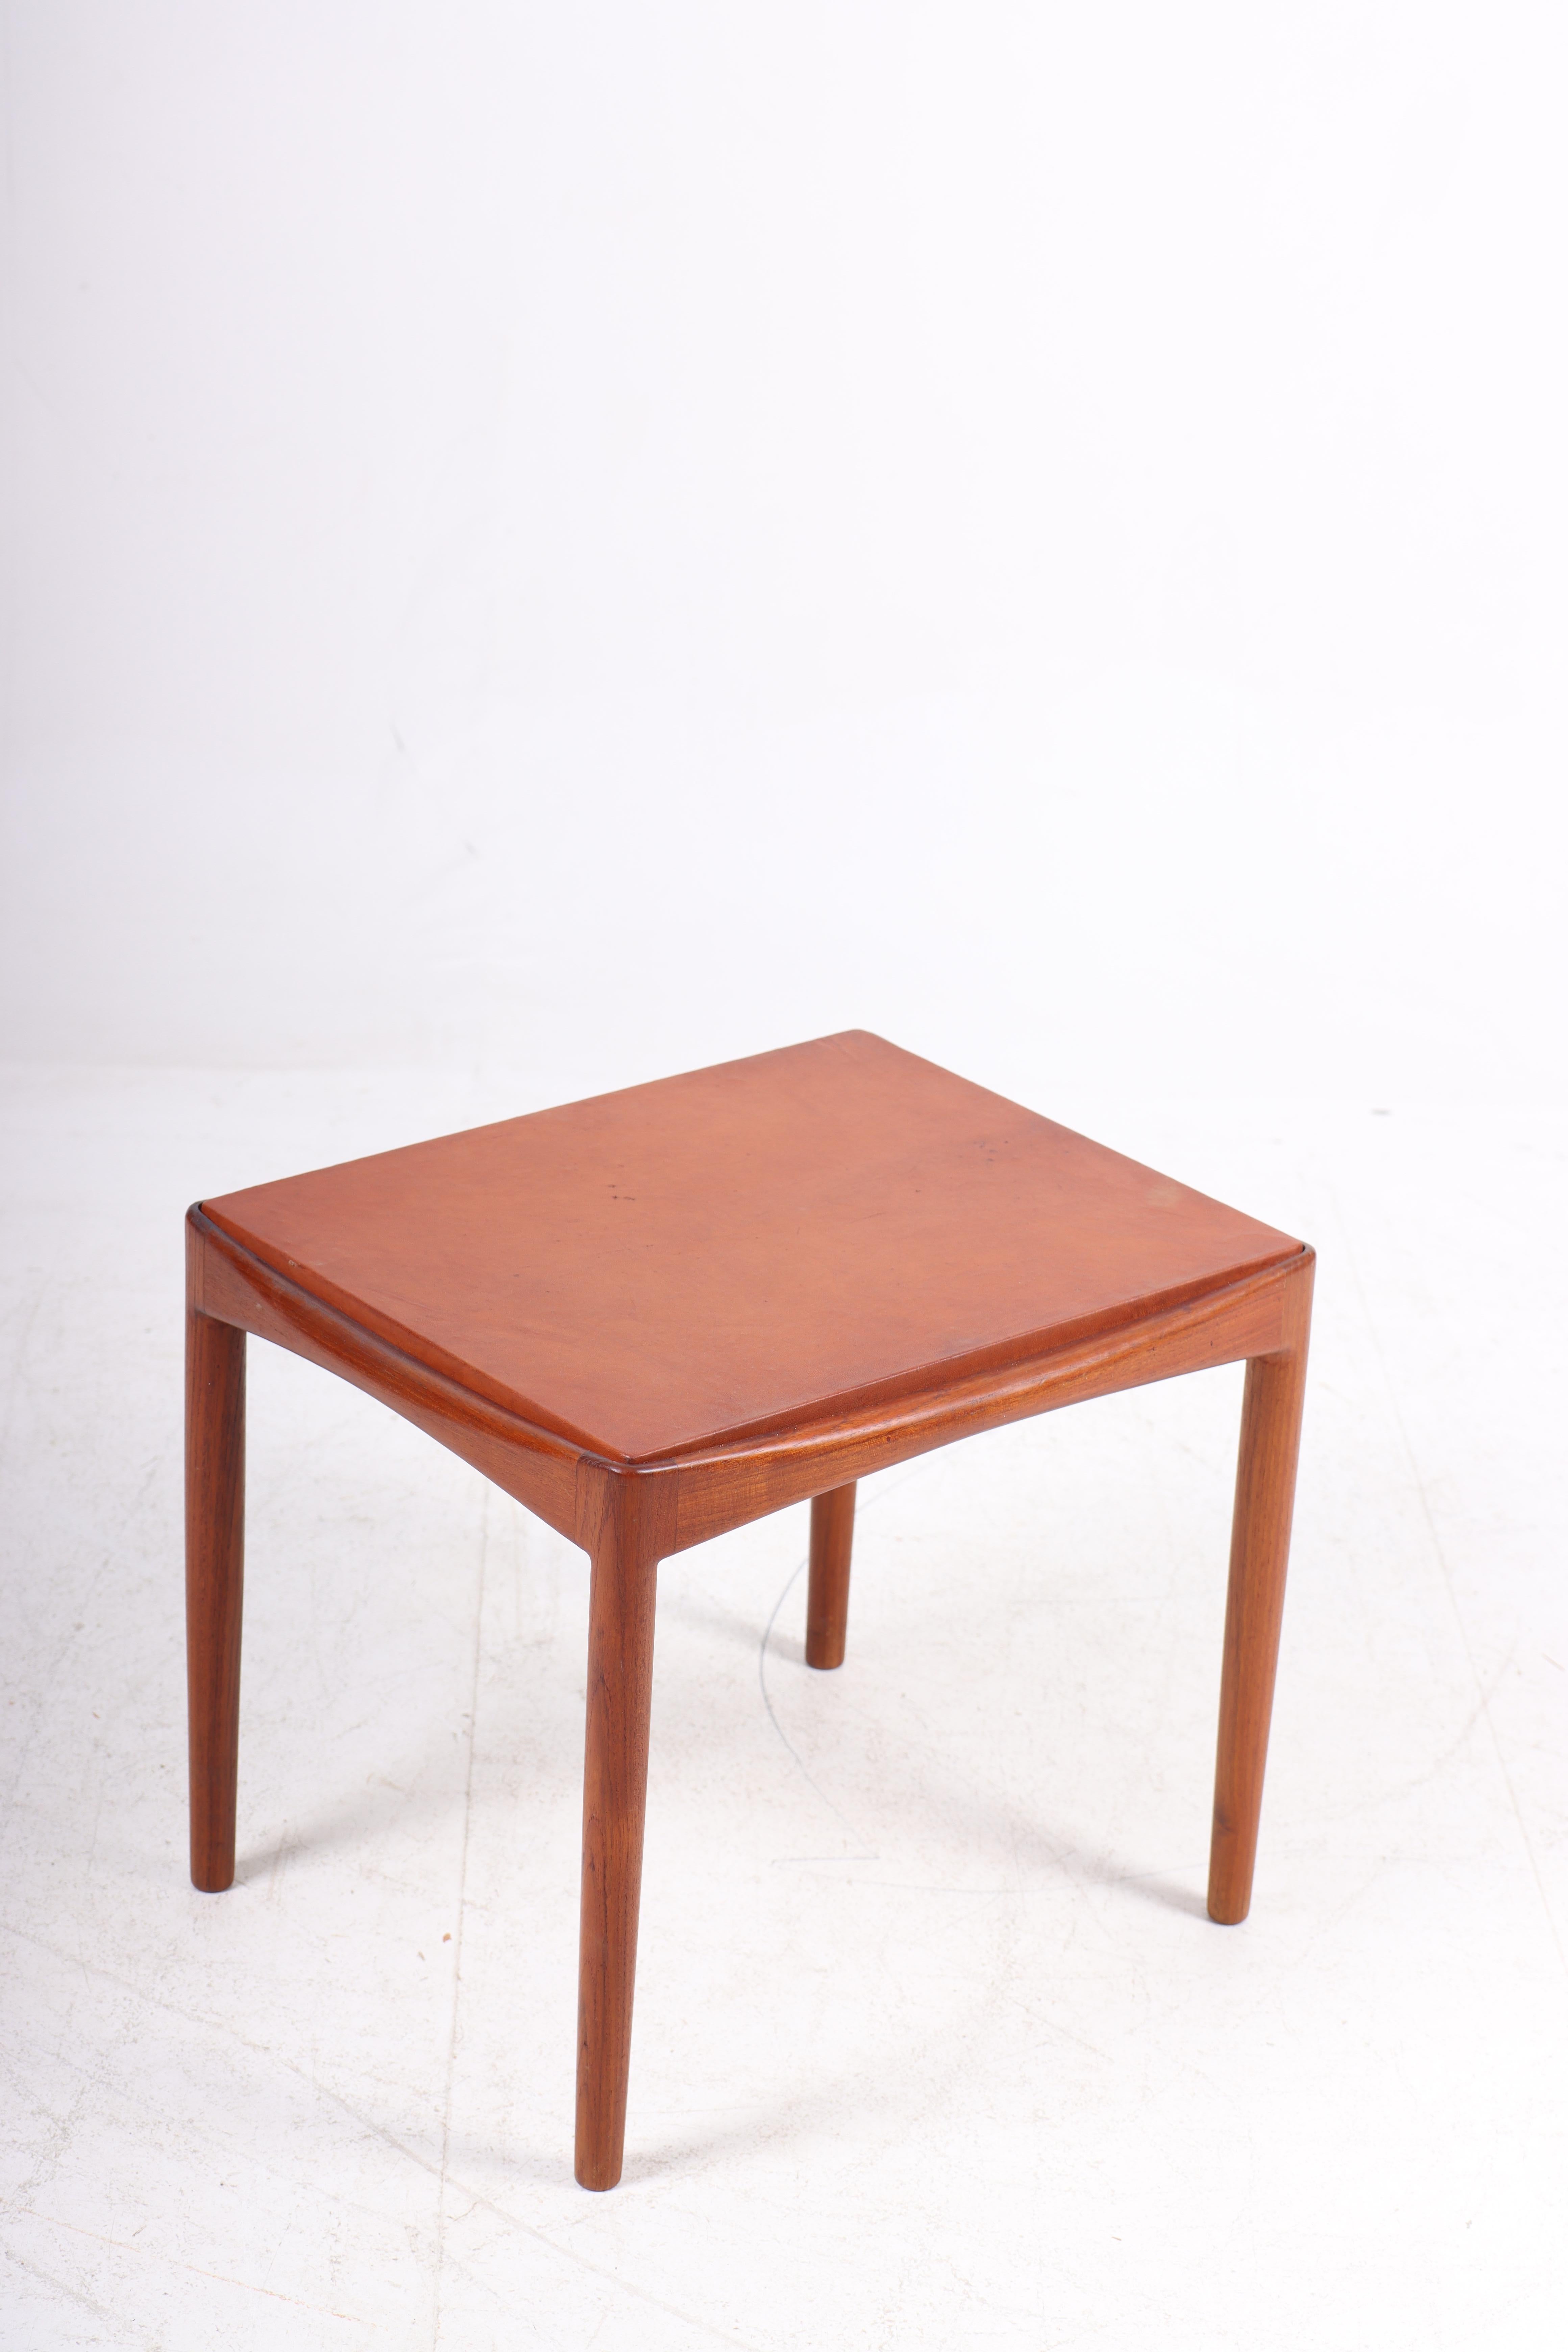 Side table in teak designed and leather by Ejner Larsen & Aksel Bender Madsen for Willy Beck Cabinet Makers Copenhagen. Made in Denmark in the 1950s. Great original condition.